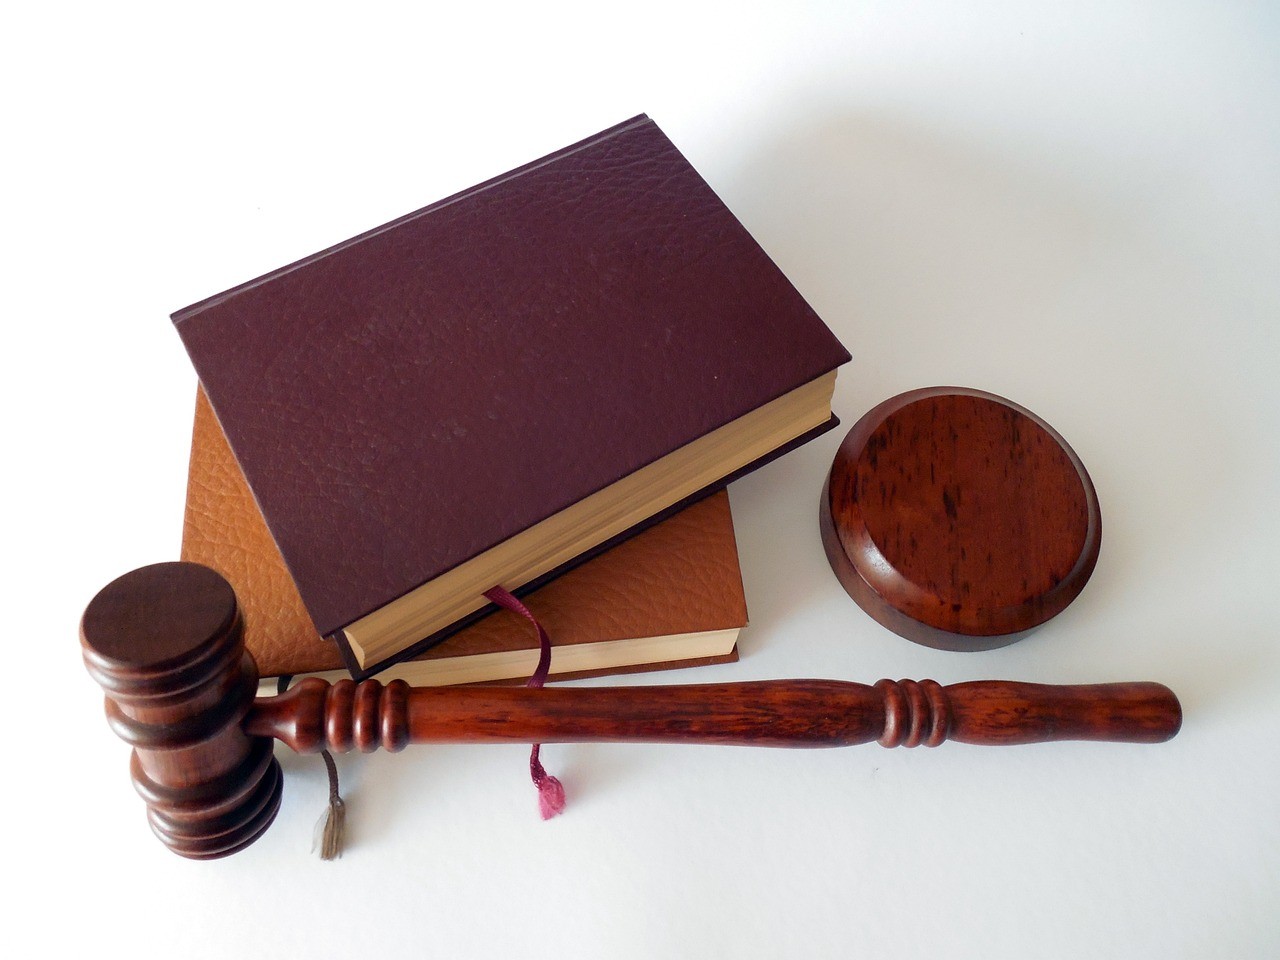 Law books and a judges gavel sit on a table